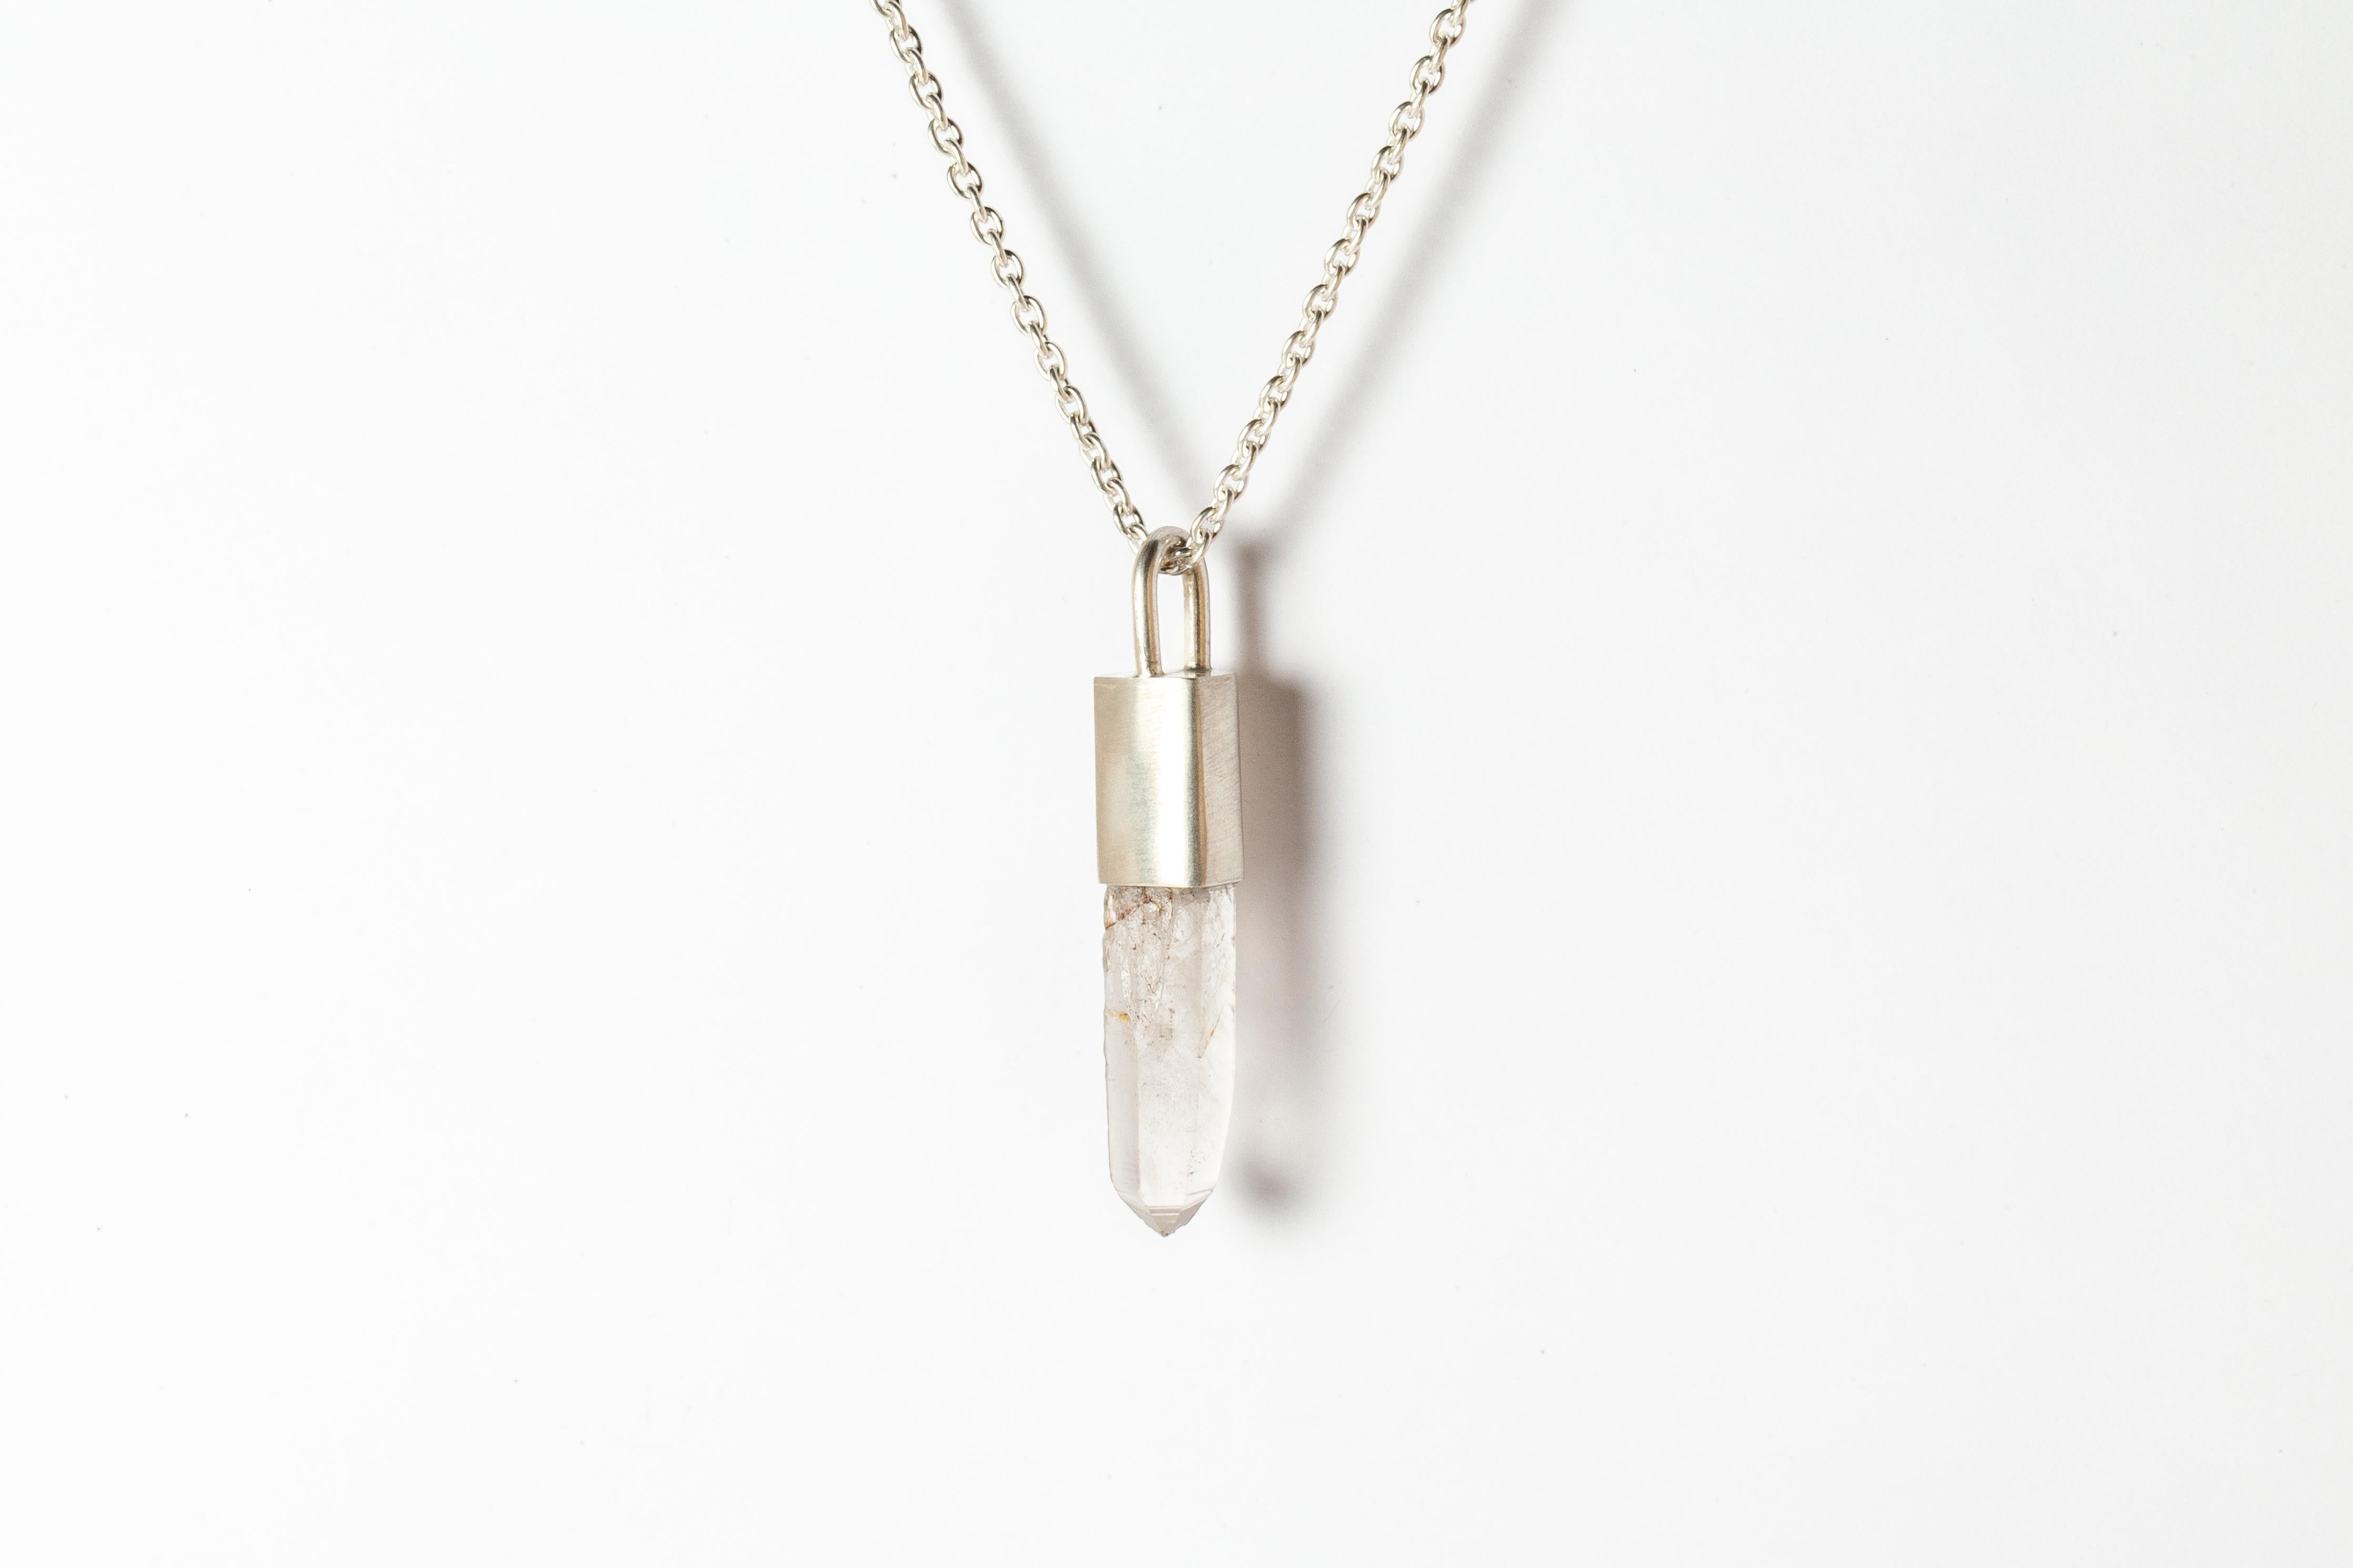 Pendant necklace in matte sterling silver and a rough of Misc Quartz. It comes on 74 cm sterling silver chain.
The Talisman series is an exploration into the power of natural crystals. The crystals used in these pieces are discovered through